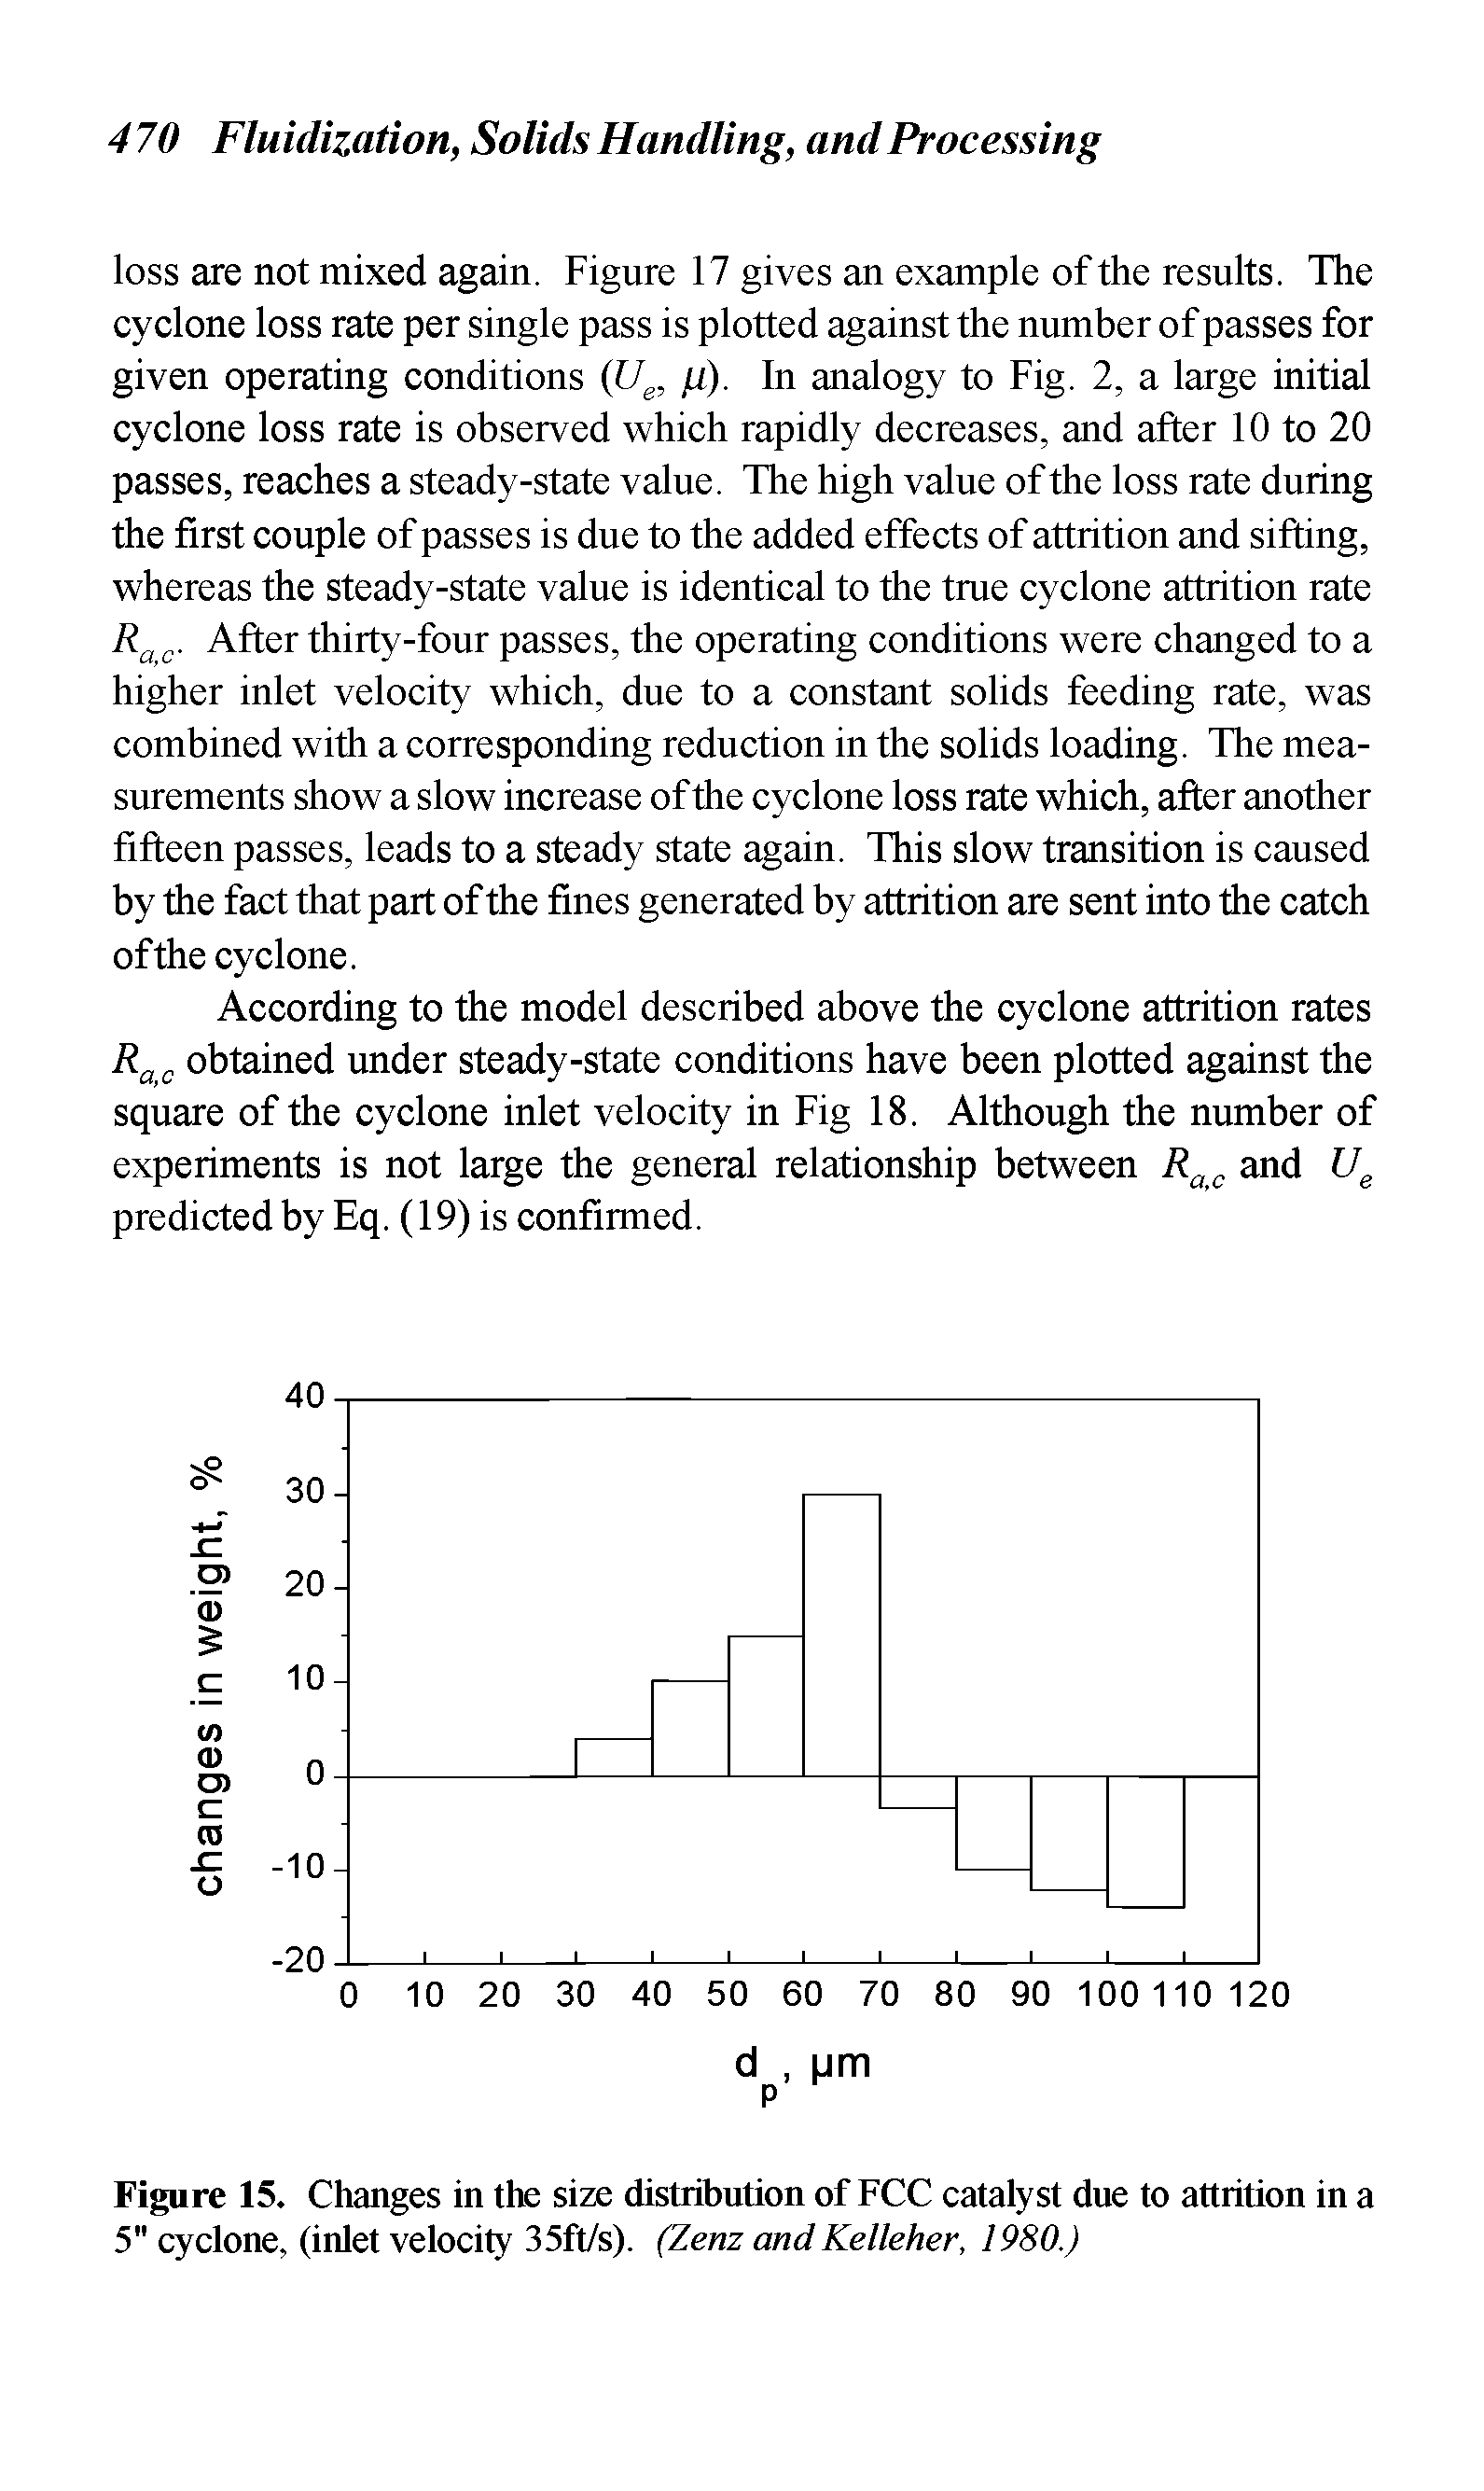 Figure 15. Changes in the size distribution of FCC catalyst due to attrition in a 5" cyclone, (inlet velocity 35ft/s). (Zenz andKelleher, 1980.)...